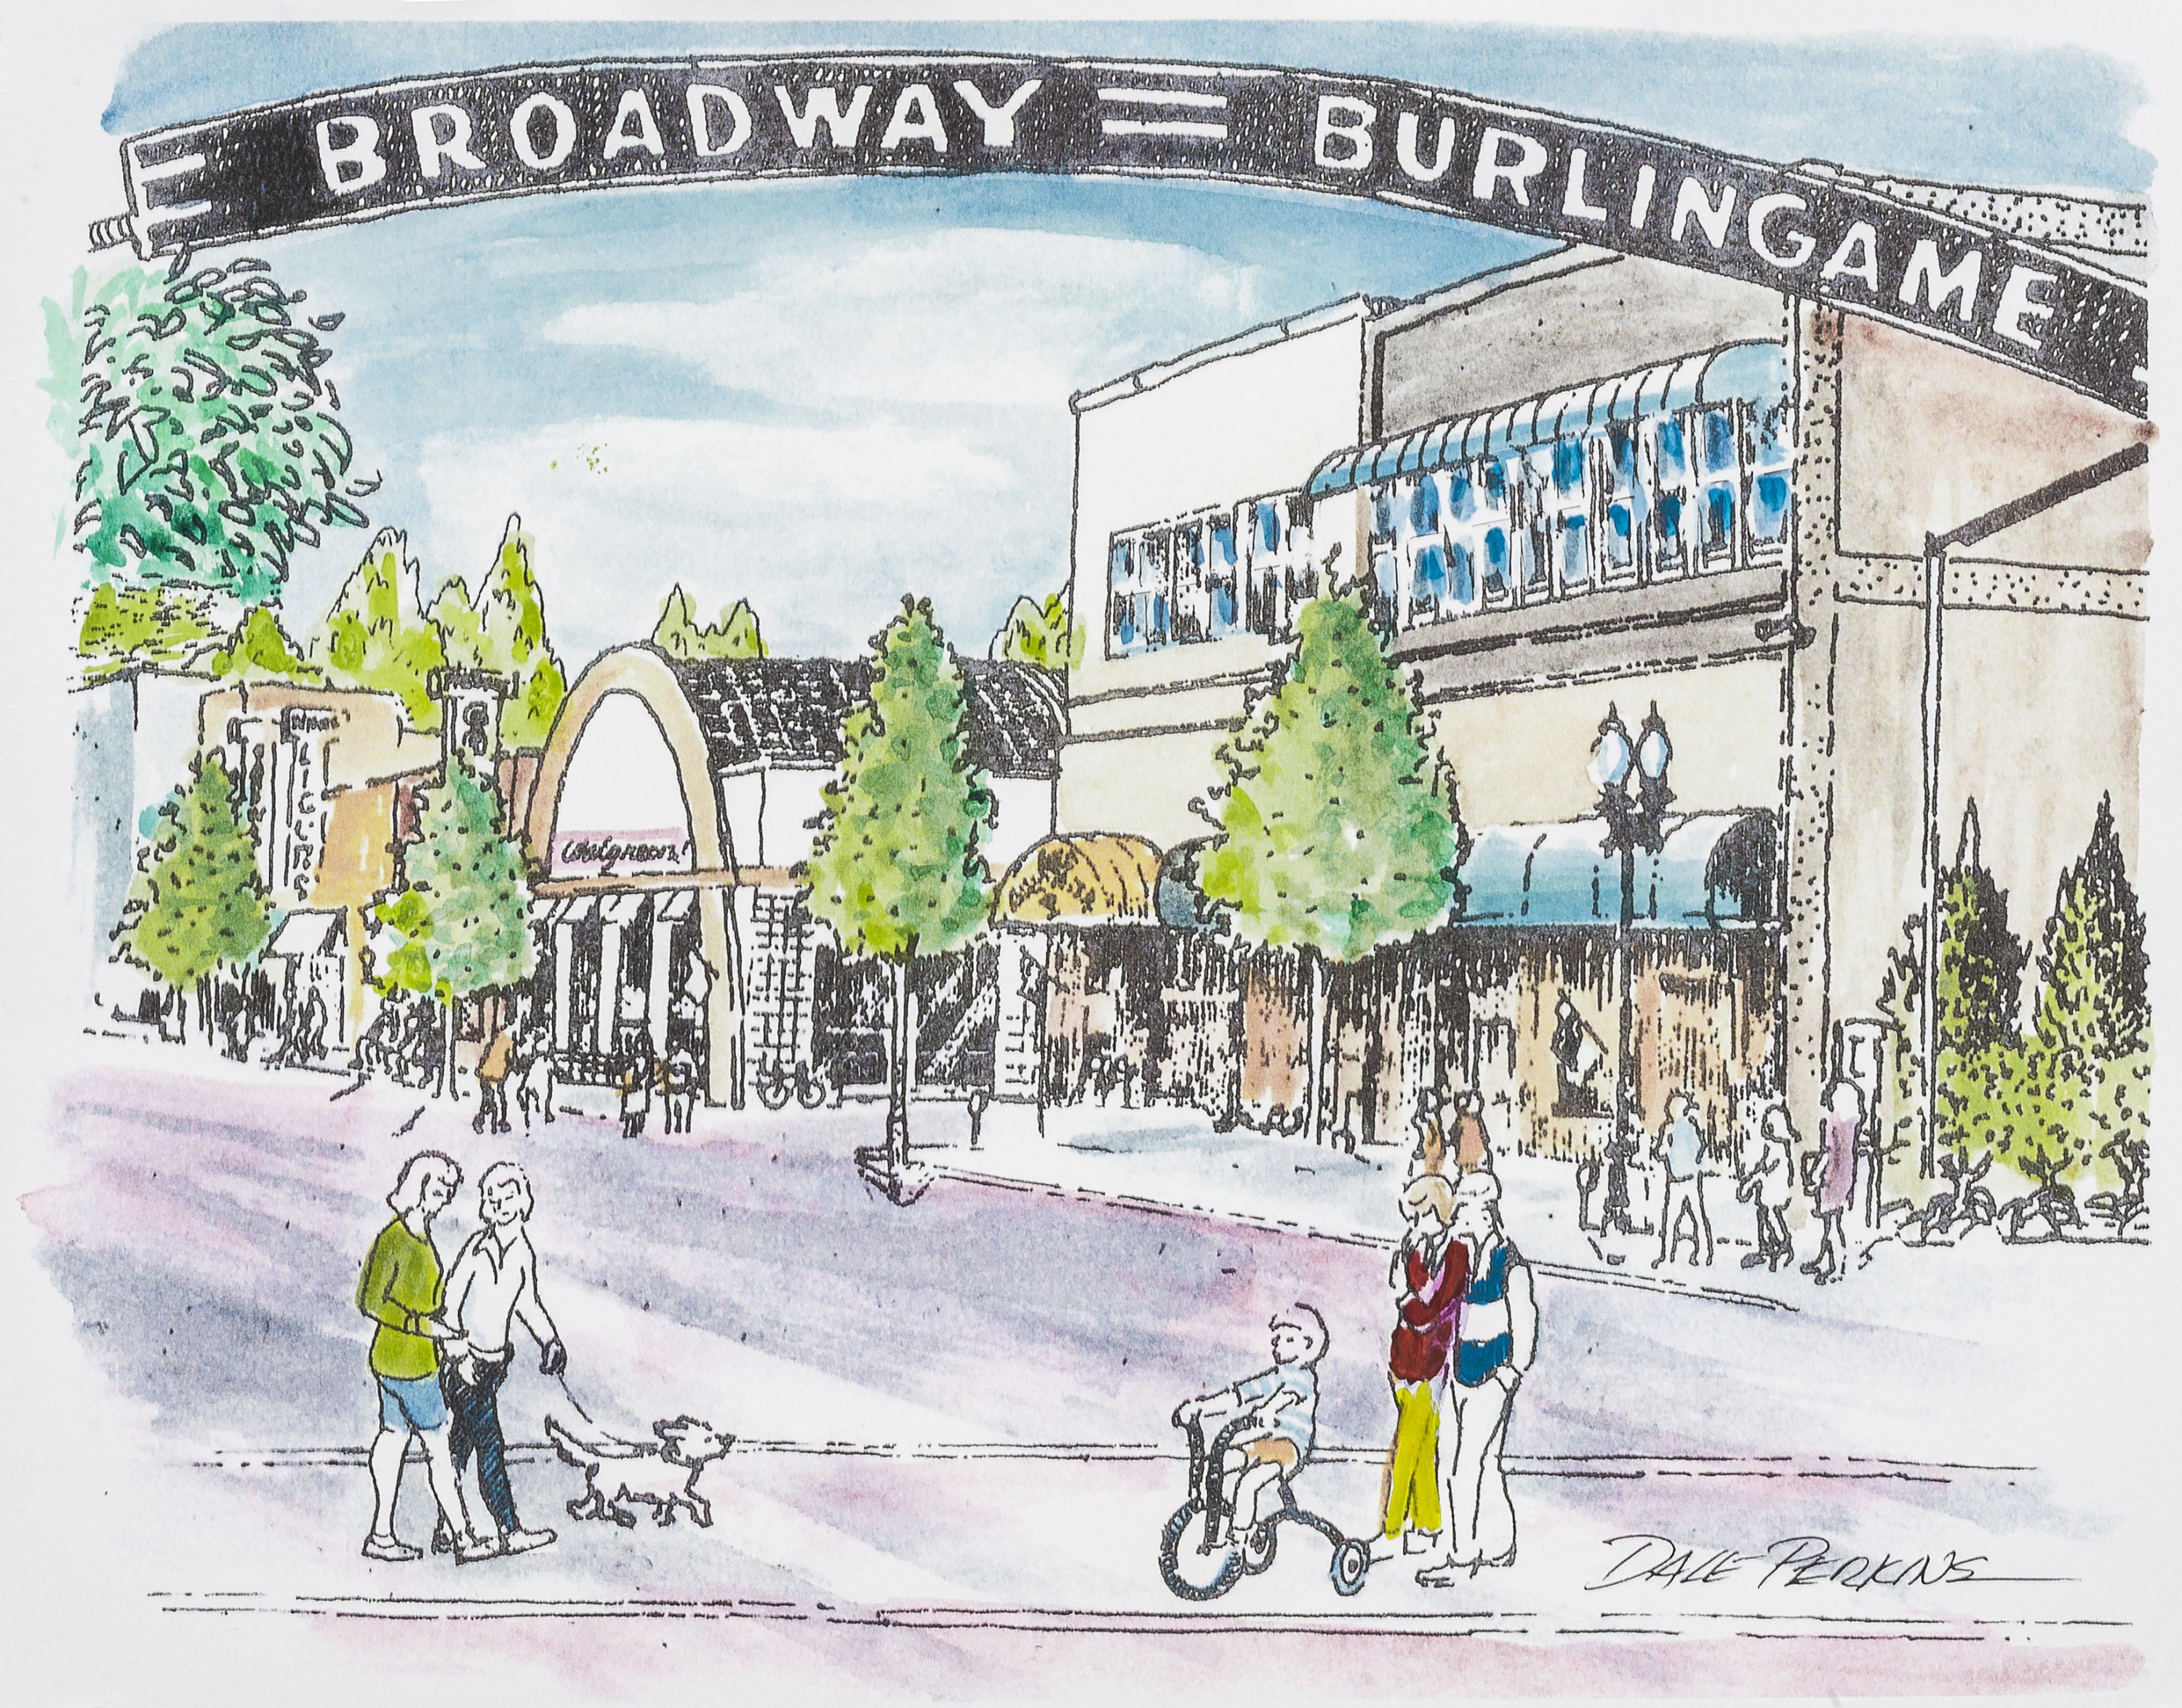 Illustration of the Broadway sign in Burlingame by Dale Perkins